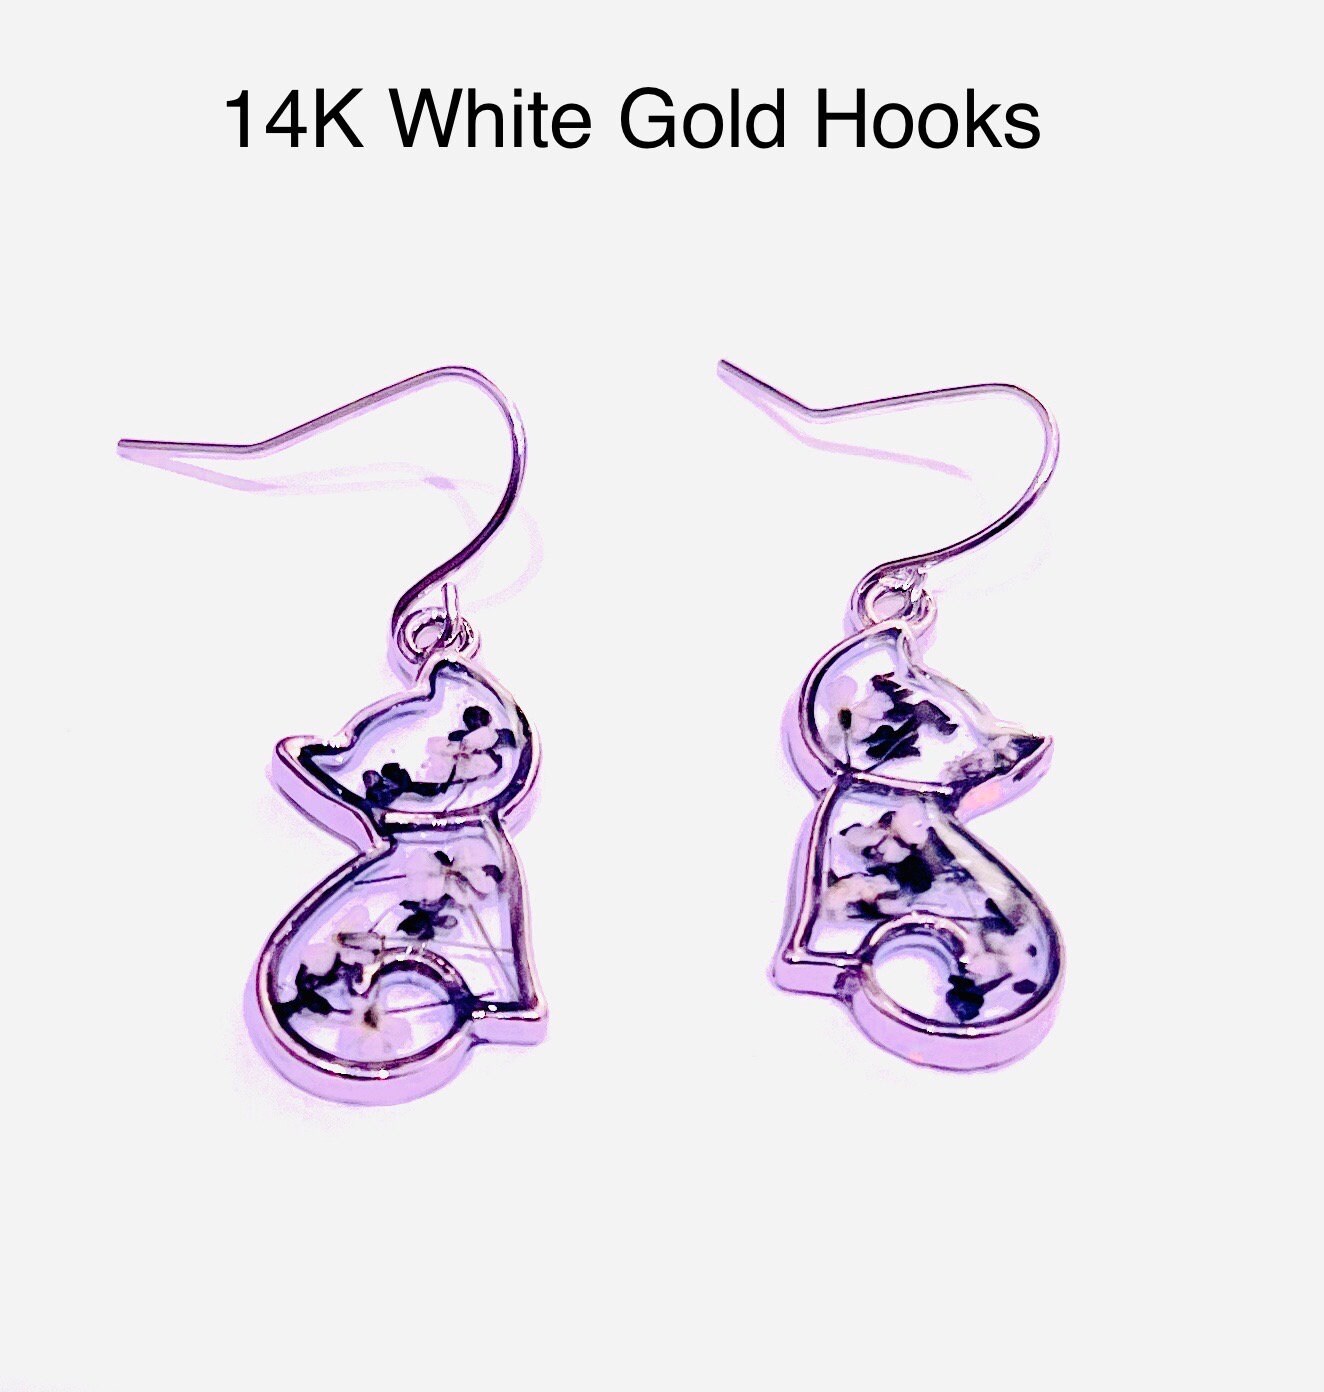 Tuxedo Cat Earrings. Black and White Queen Anne’s lace flowers. 14K white gold plated earrings. 18K Gold Hoops. Special Gift for Cat Lovers.